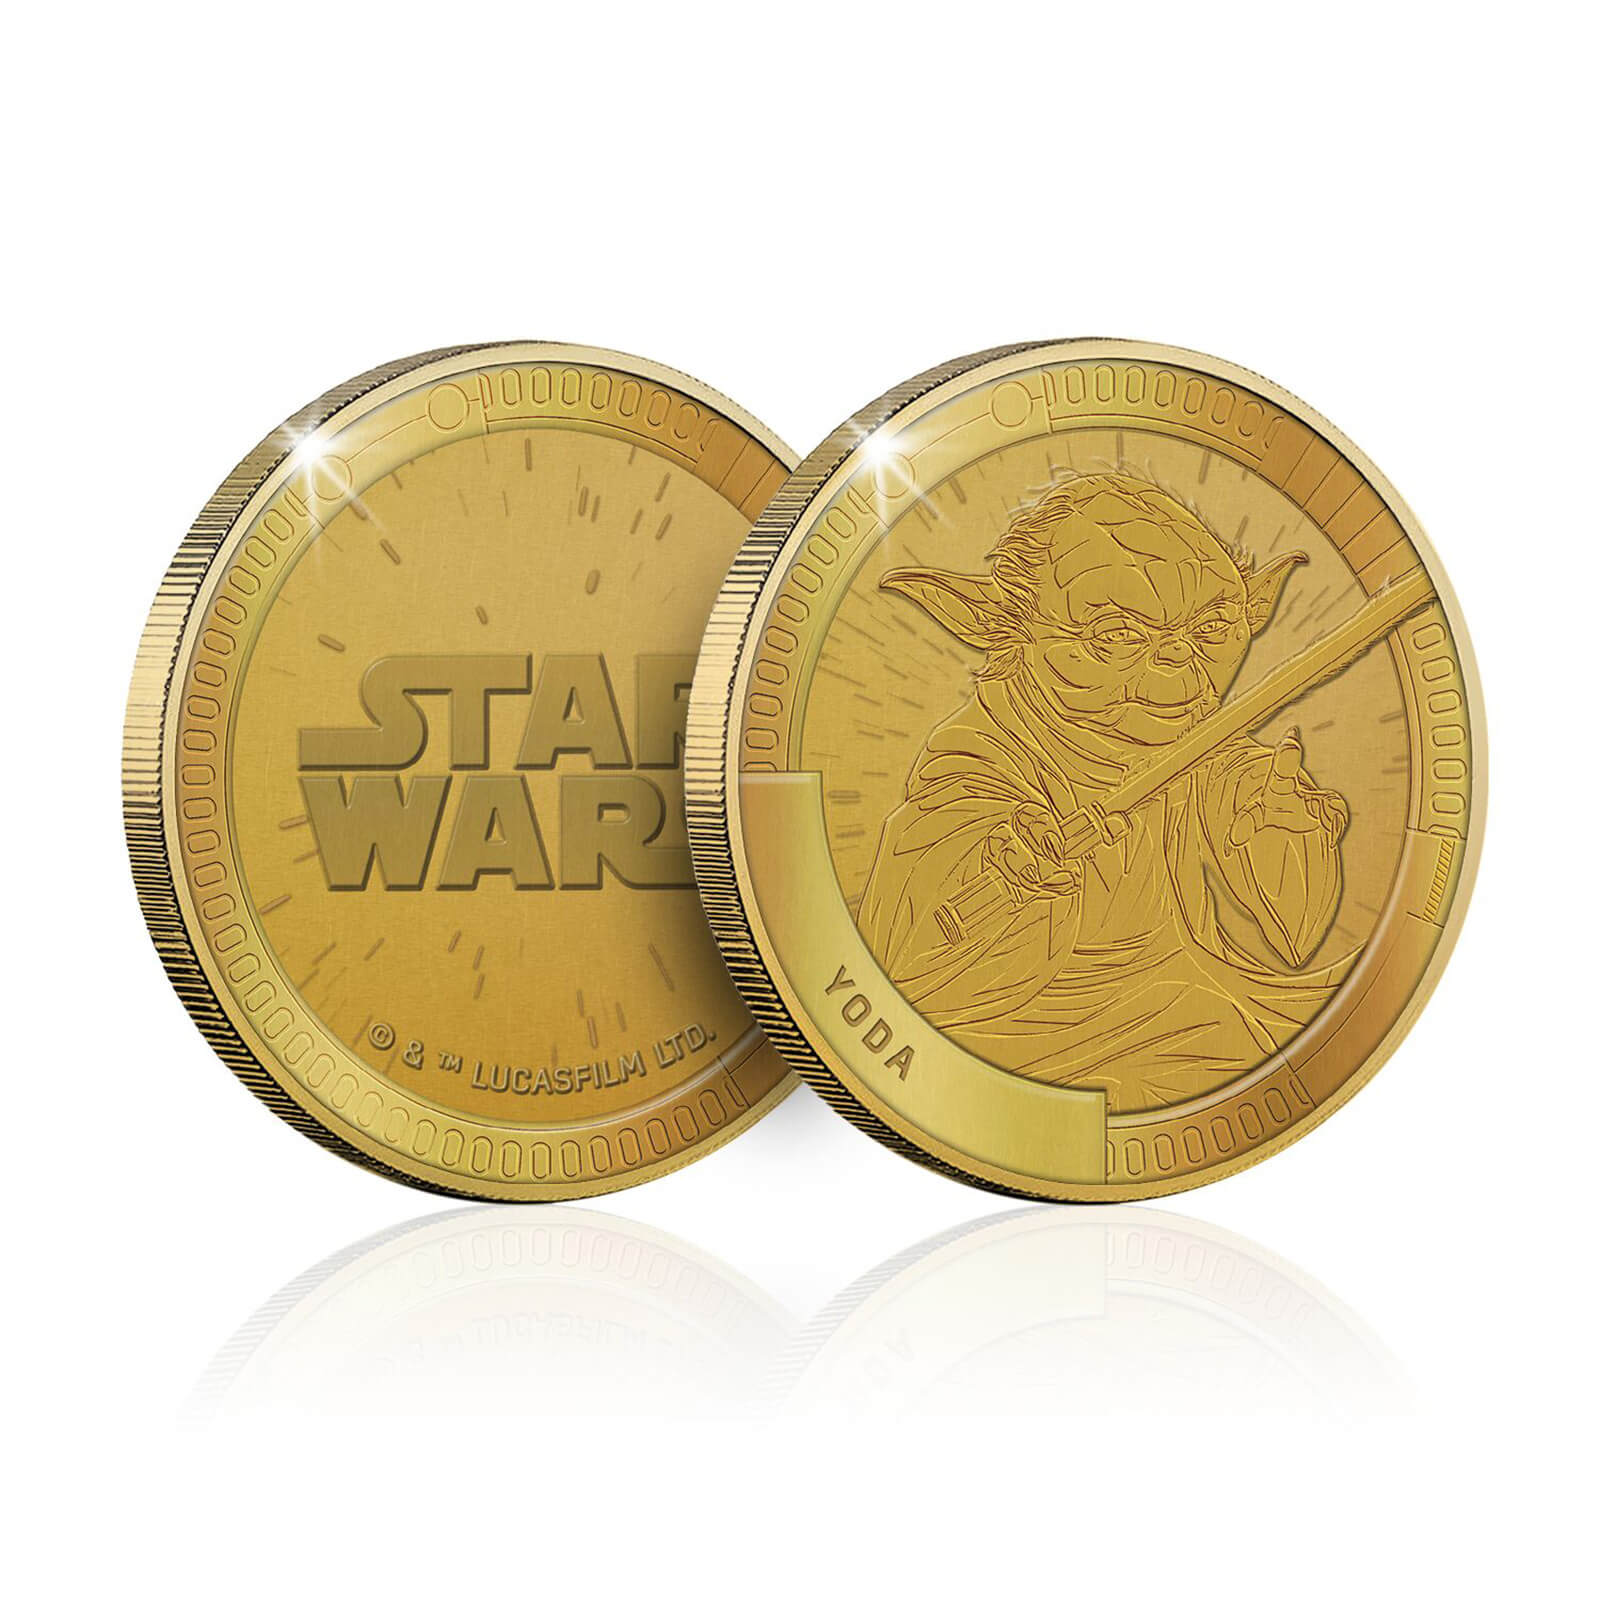 star wars collector coins